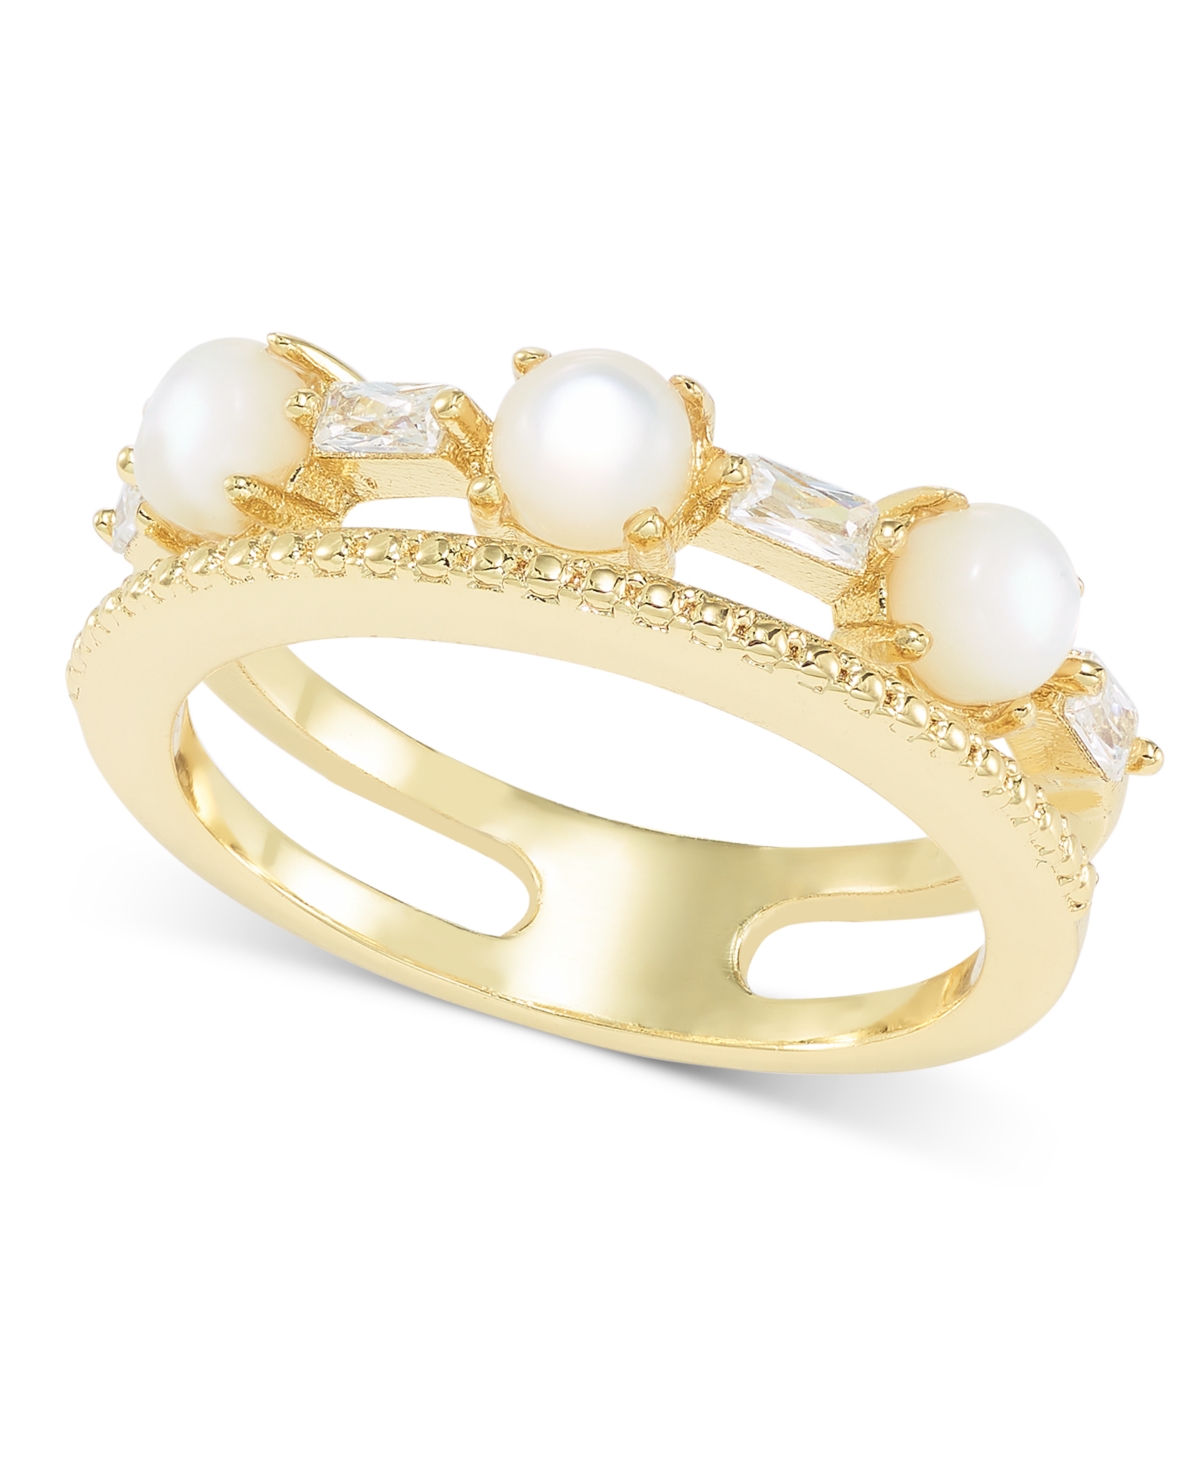 Gold-Tone Cubic Zirconia & Imitation Pearl Double-Row Ring, Created for Macy's - Gold